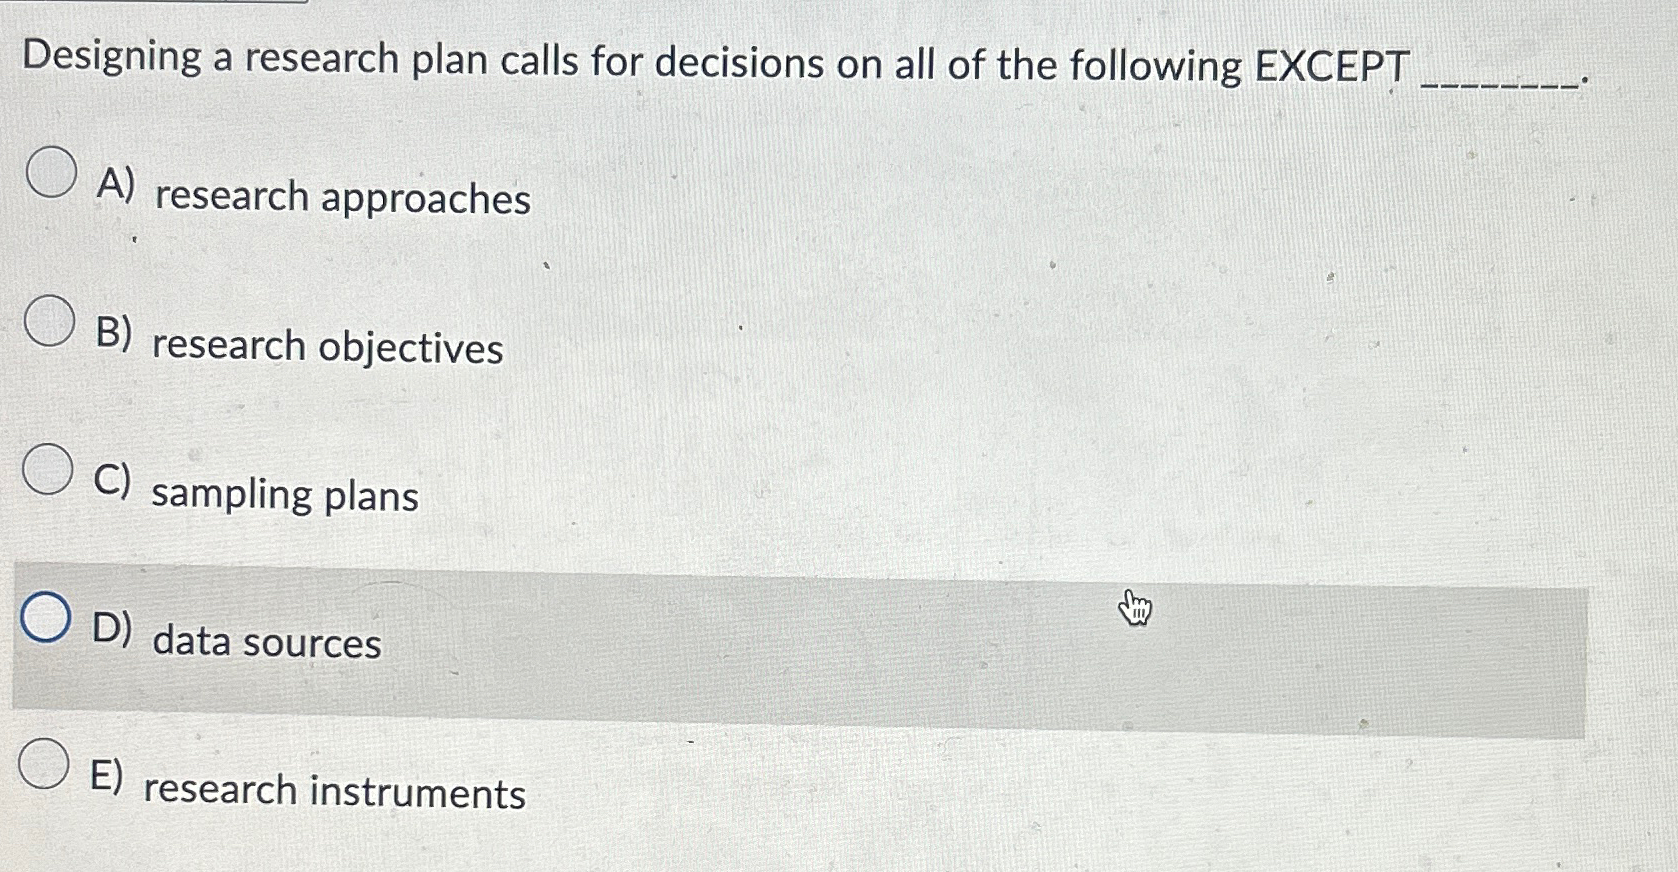 designing a research plan calls for decisions on all of the following except